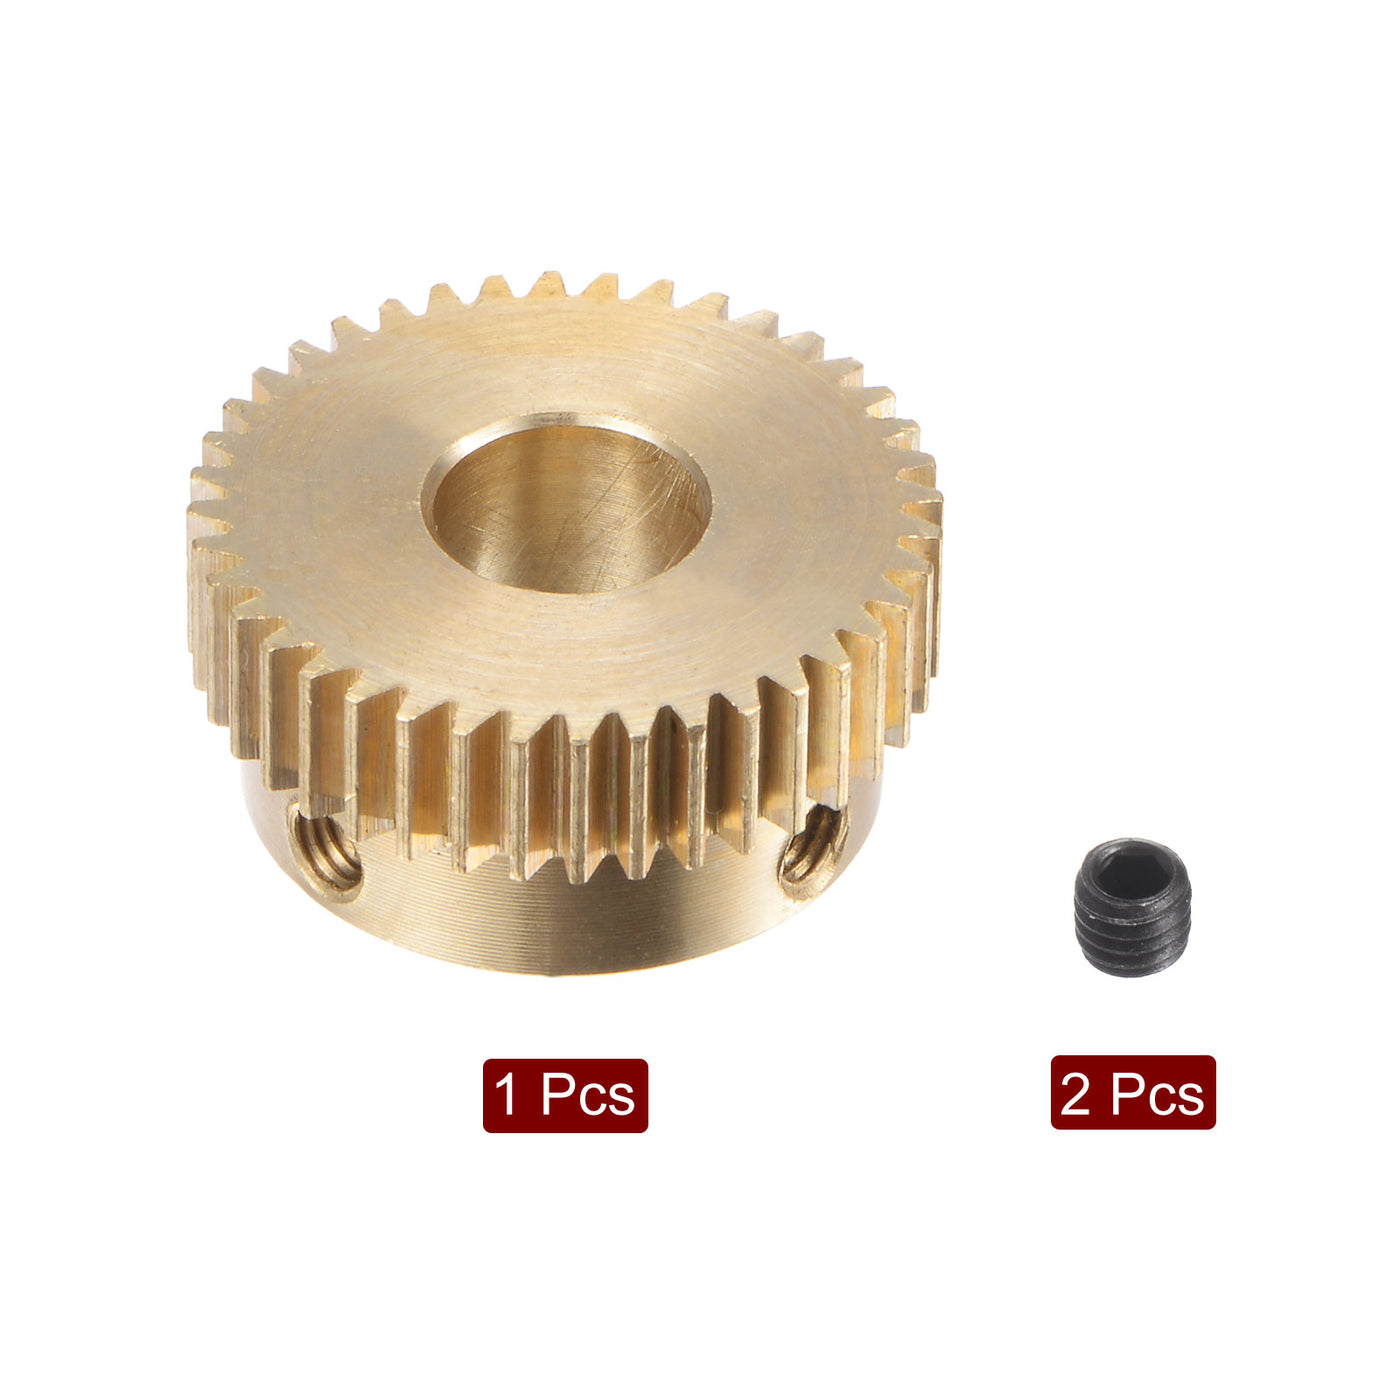 uxcell Uxcell 0.5 Mod 40T 7mm Bore 21mm Outer Dia Brass Motor Rack Pinion Gear with Screws